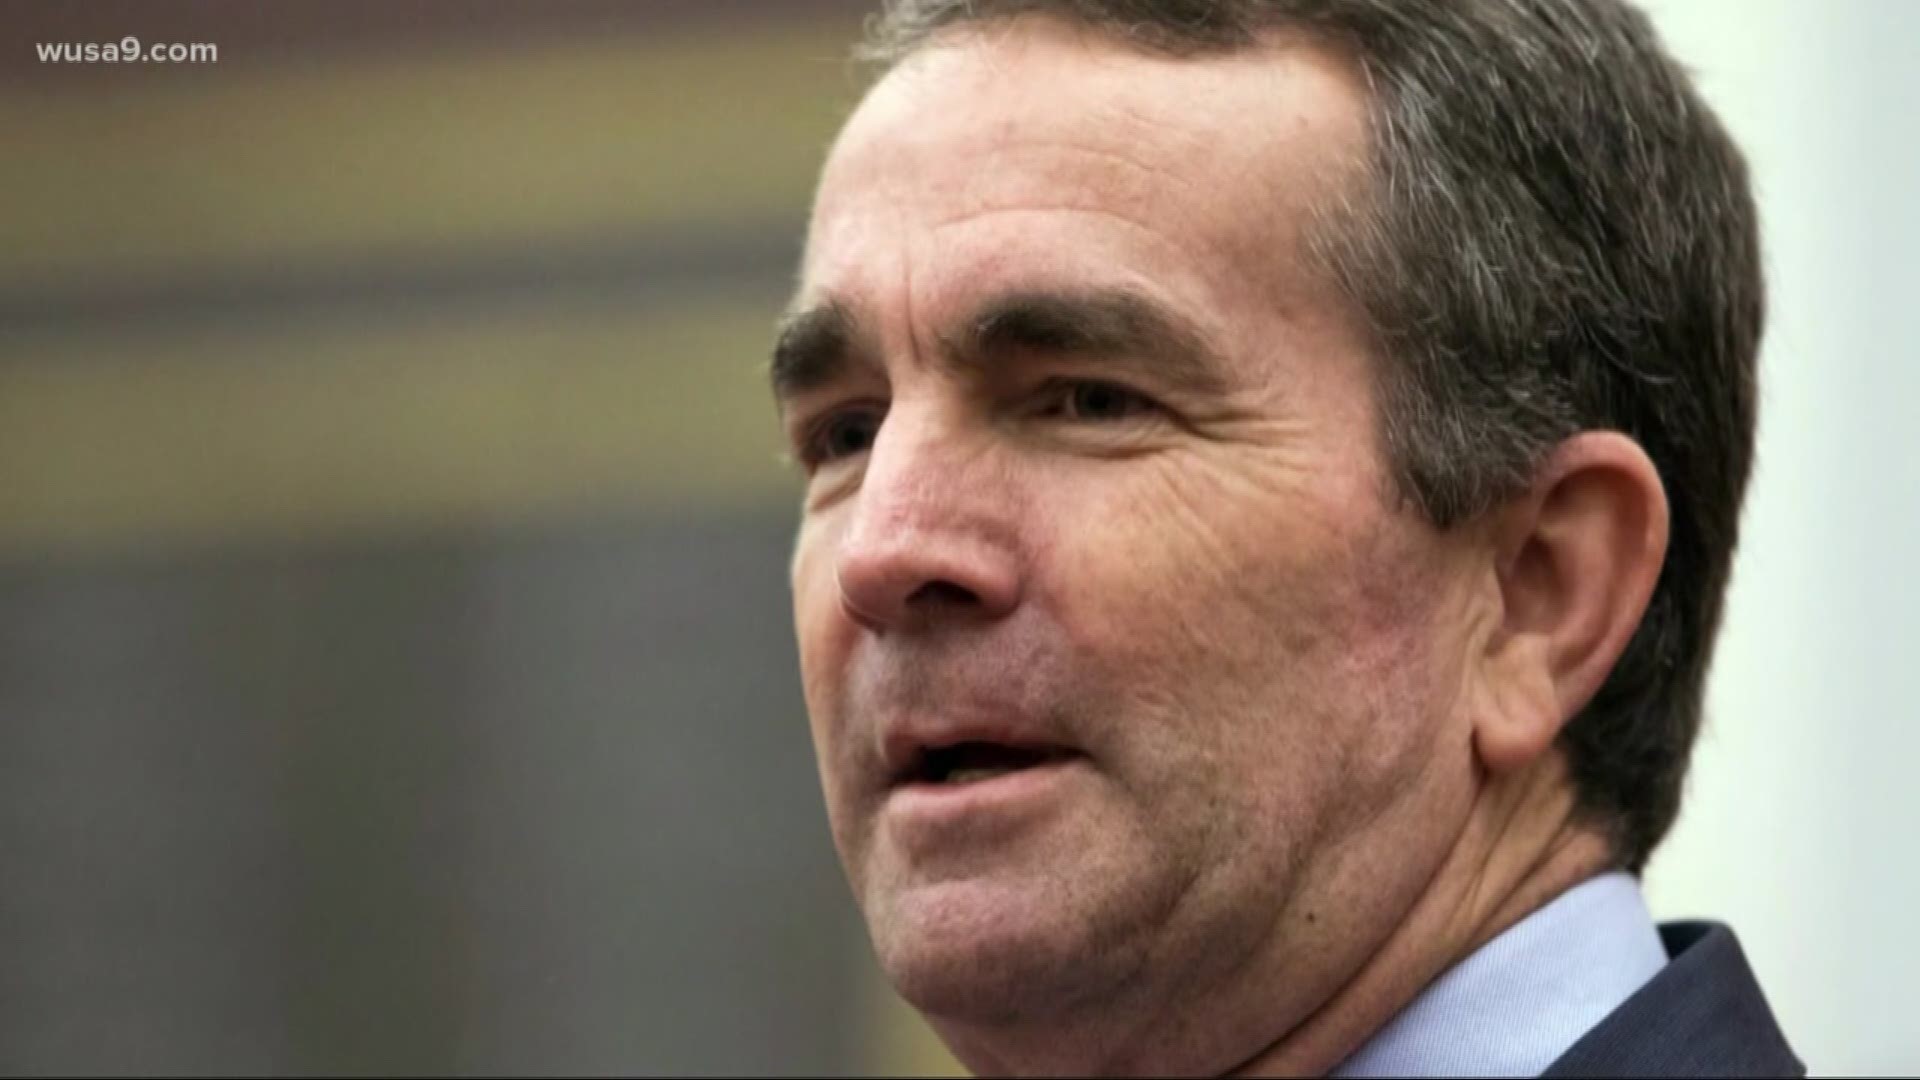 Virginia Governor Ralph Northam is deciding whether to resign over a racist photo in his medical school yearbook. Our panel weighs in.